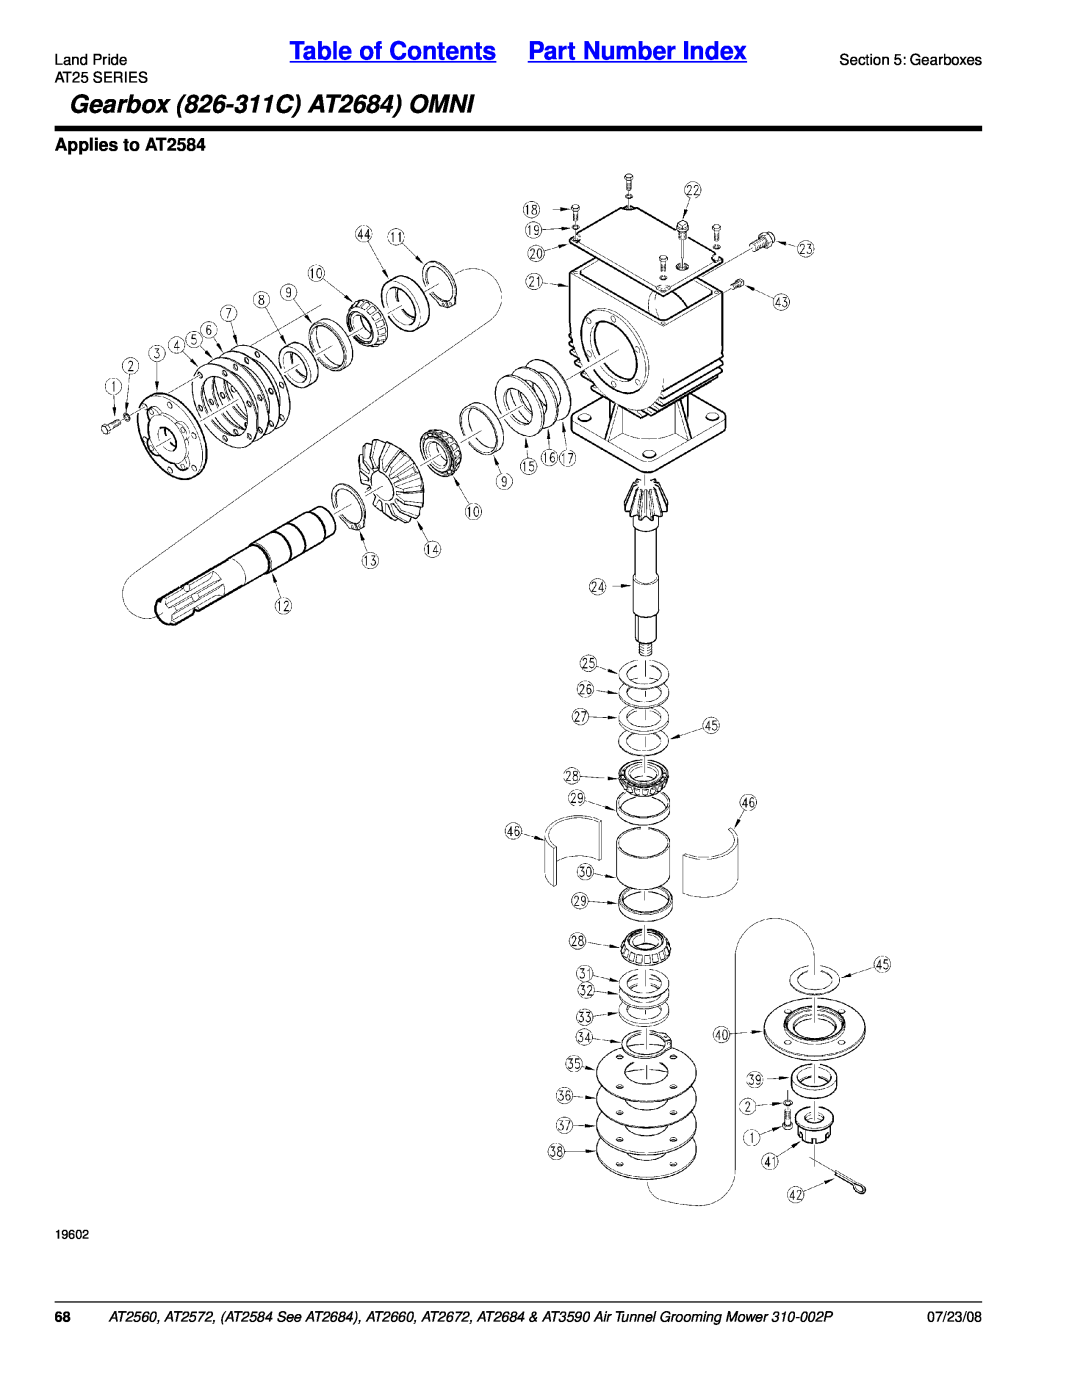 Land Pride Gearbox 826-311CAT2684 OMNI, Land PrideTable of Contents Part Number Index, Applies to AT2584, 07/23/08 